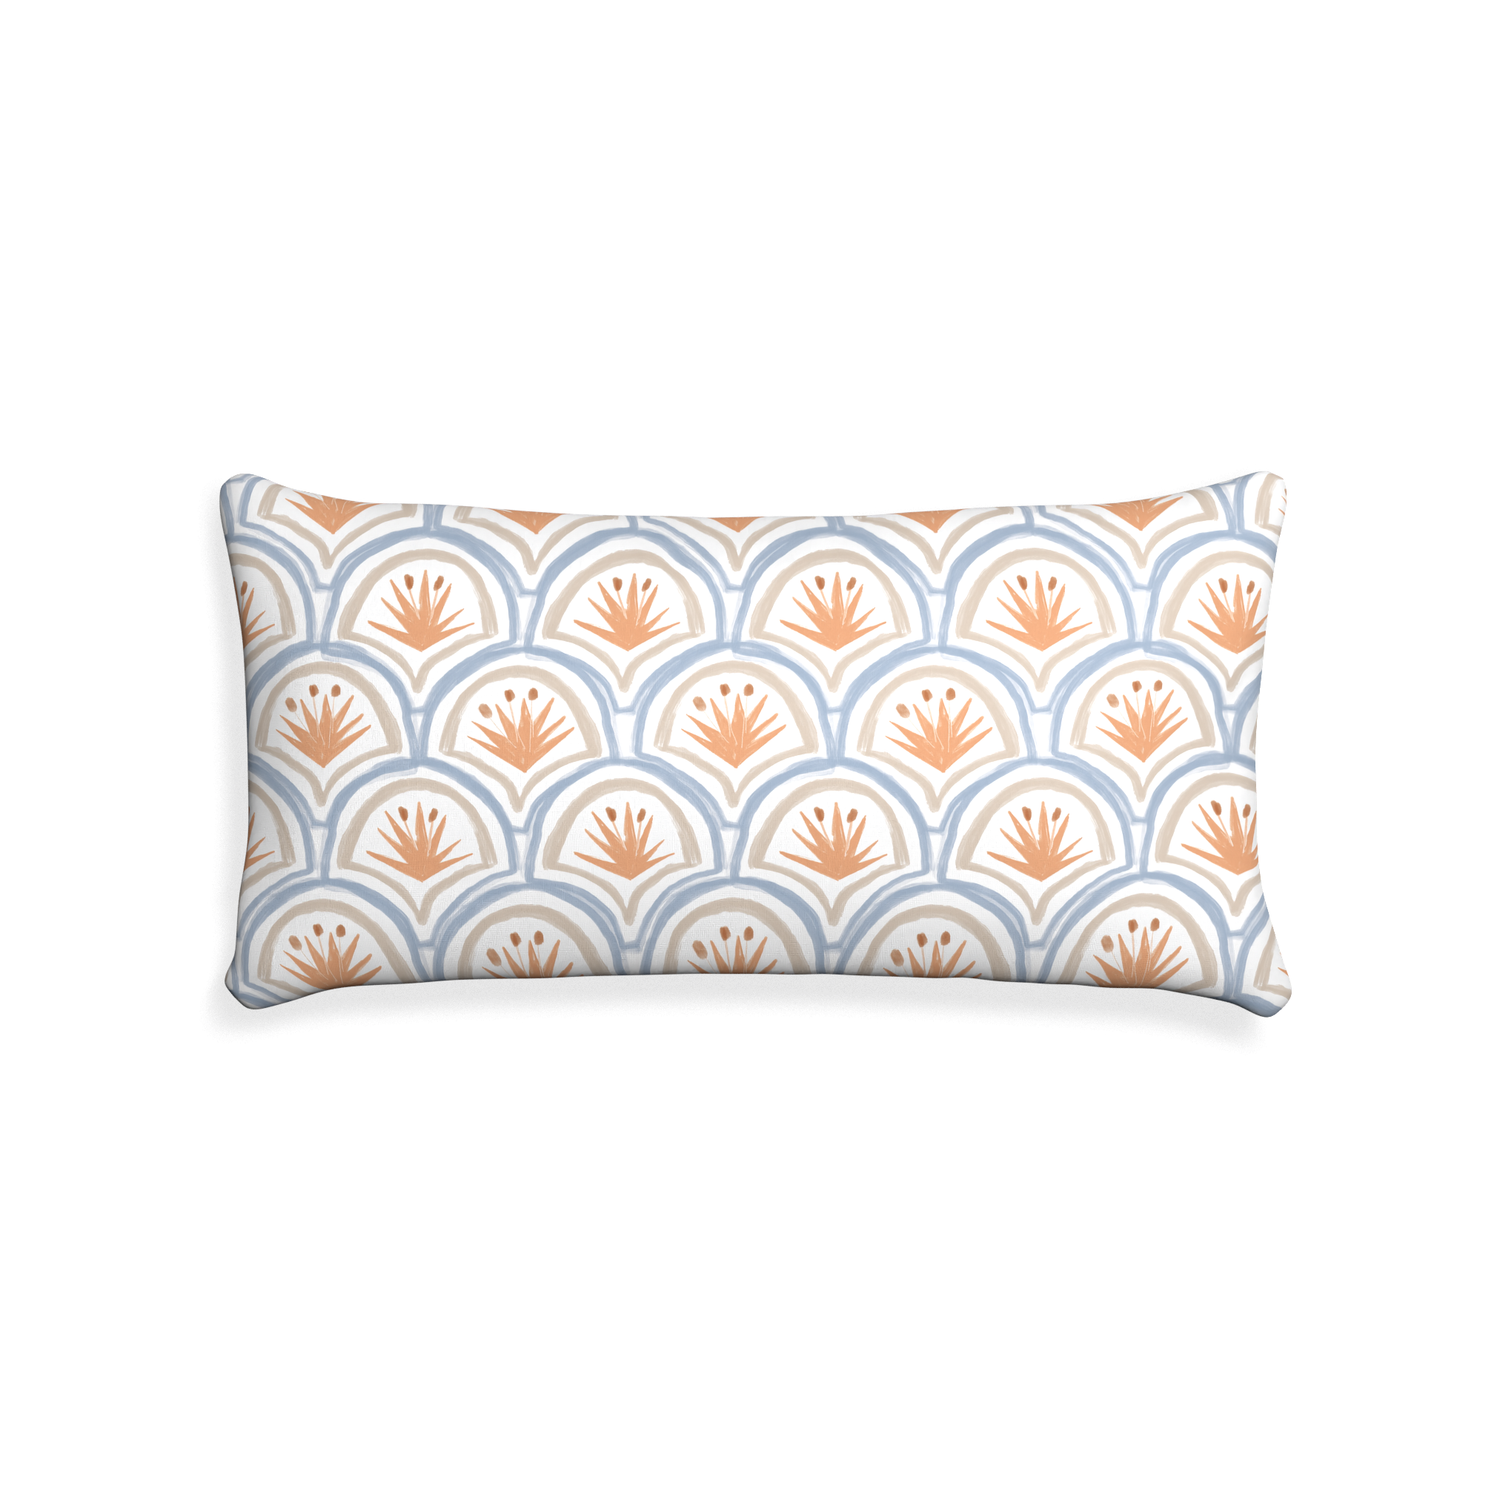 Midi-lumbar thatcher apricot custom art deco palm patternpillow with none on white background